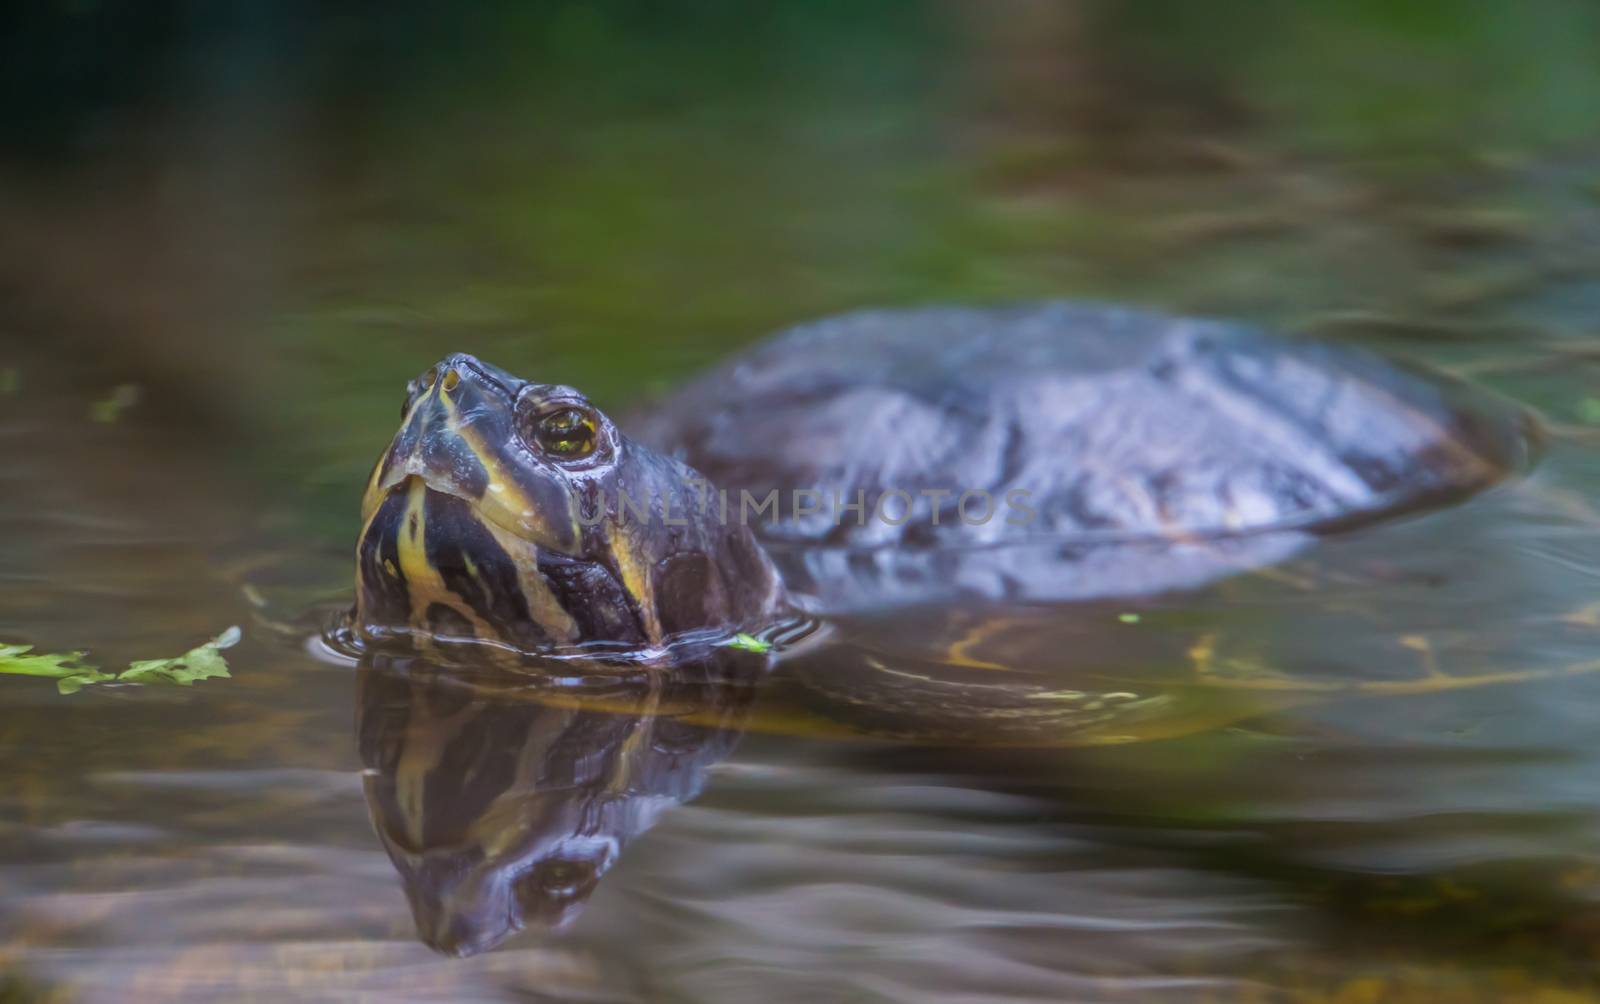 beautiful closeup of a cumberland slider turtle swimming in the water, tropical reptile specie from America by charlottebleijenberg